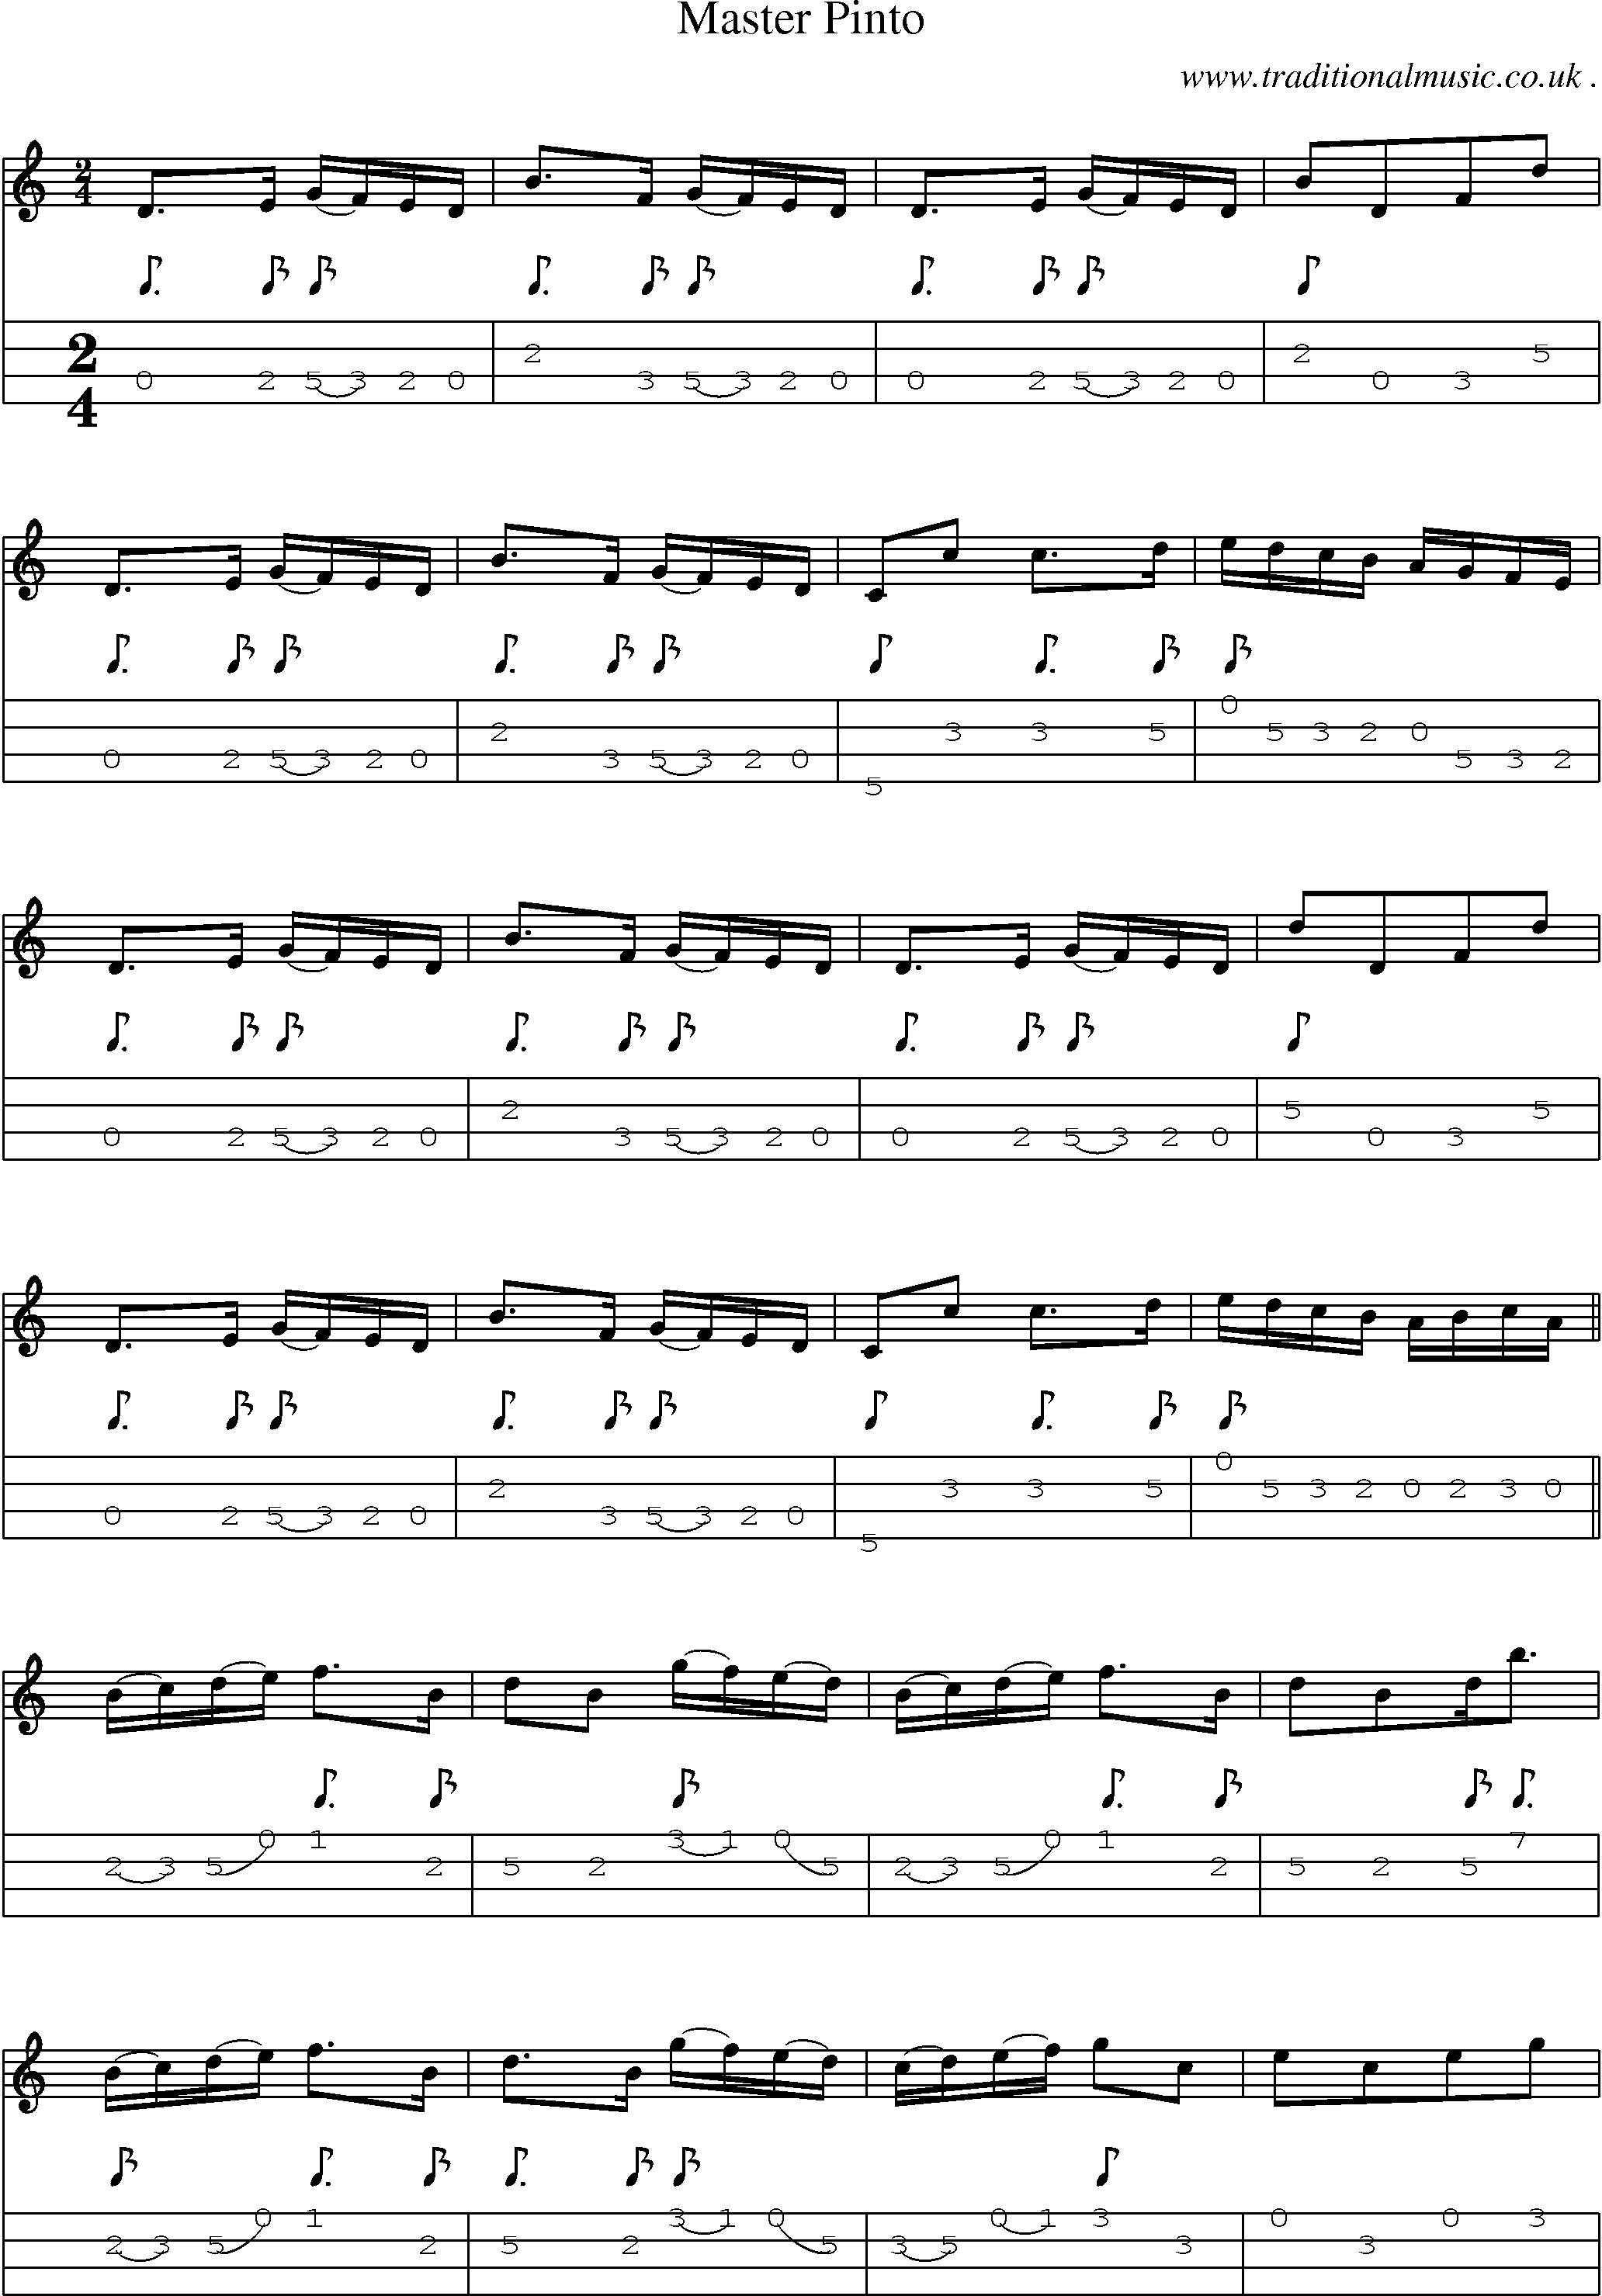 Sheet-music  score, Chords and Mandolin Tabs for Master Pinto